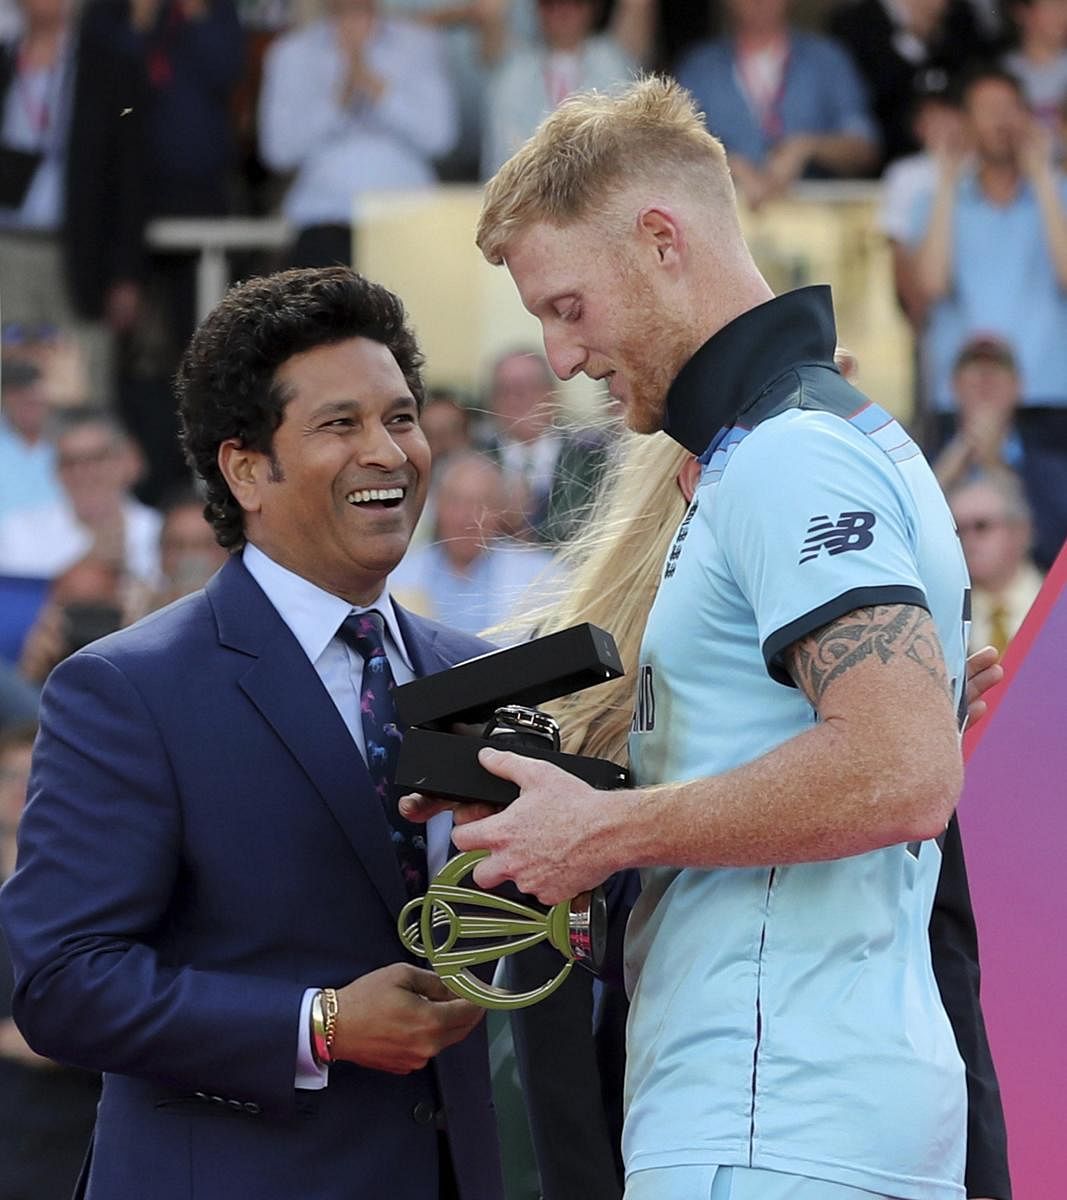 Ben Stokes receives the Player of the Match award from former Indian cricketer Sachin Tendulkar after his team won the Cricket World Cup final match between England and New Zealand at Lord's cricket ground in London, England, Sunday, July 14, 2019. AP/PTI